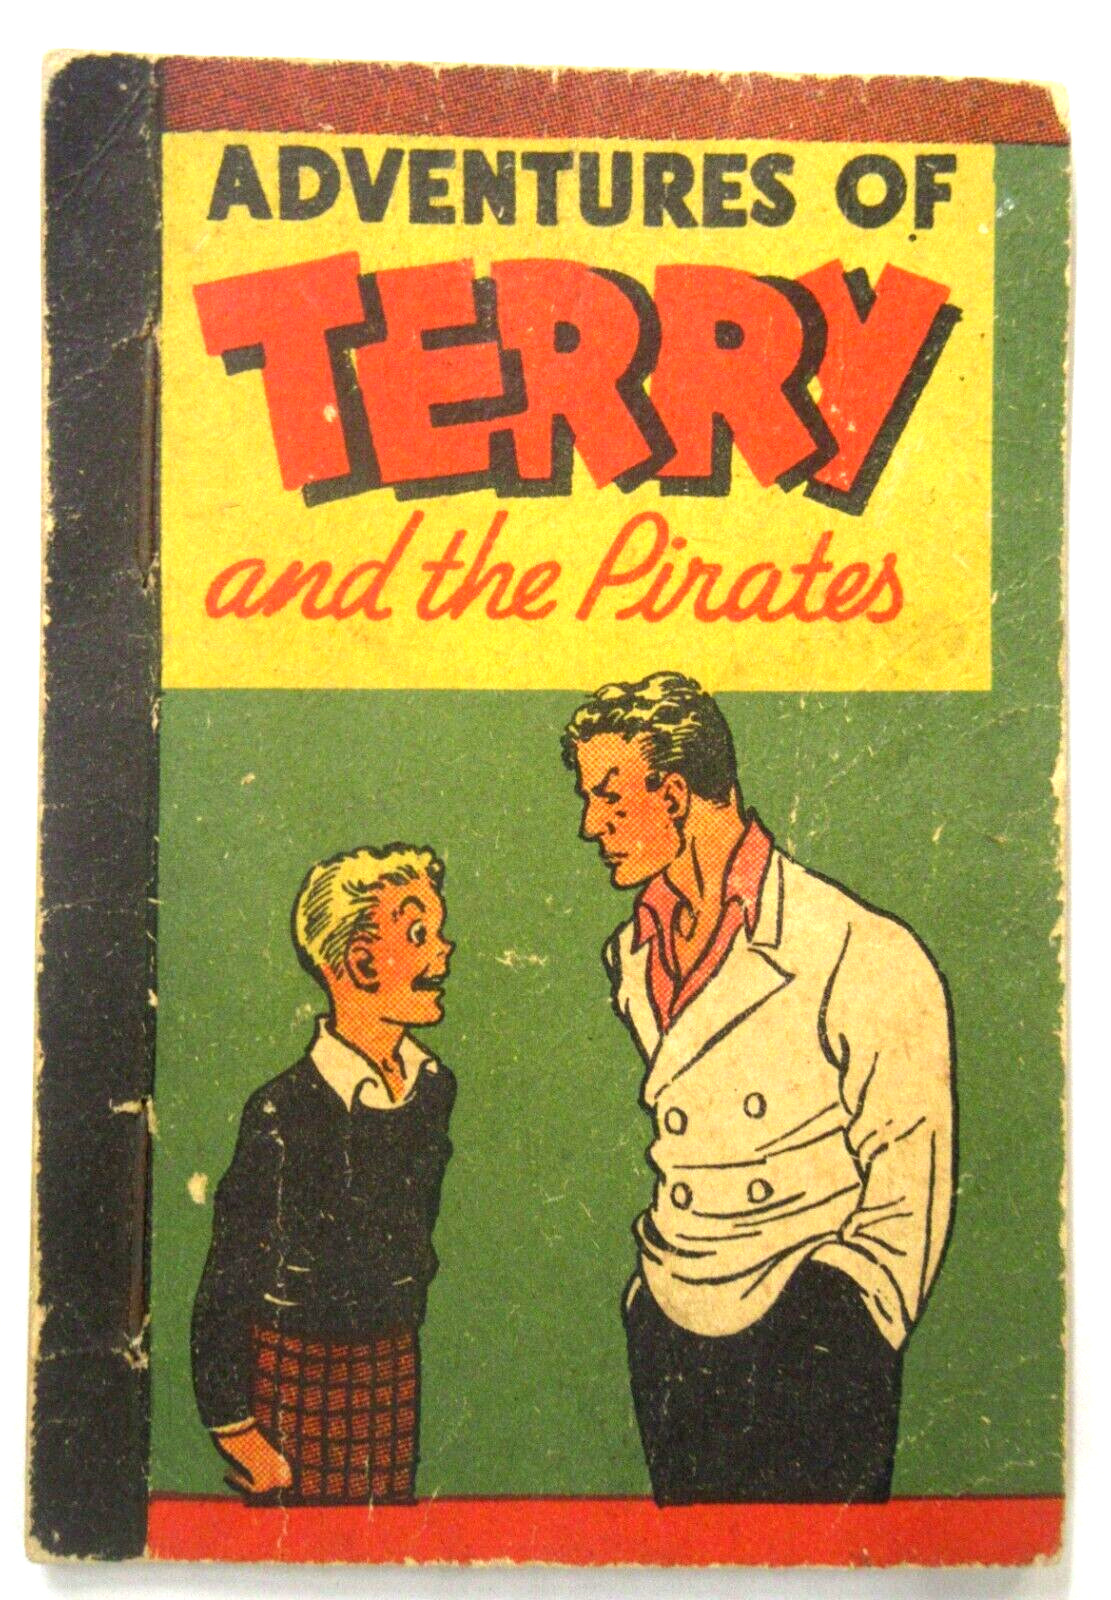 1938 TERRY & THE PIRATES Milton Caniff Whitman penny book PENNEY'S premium yy